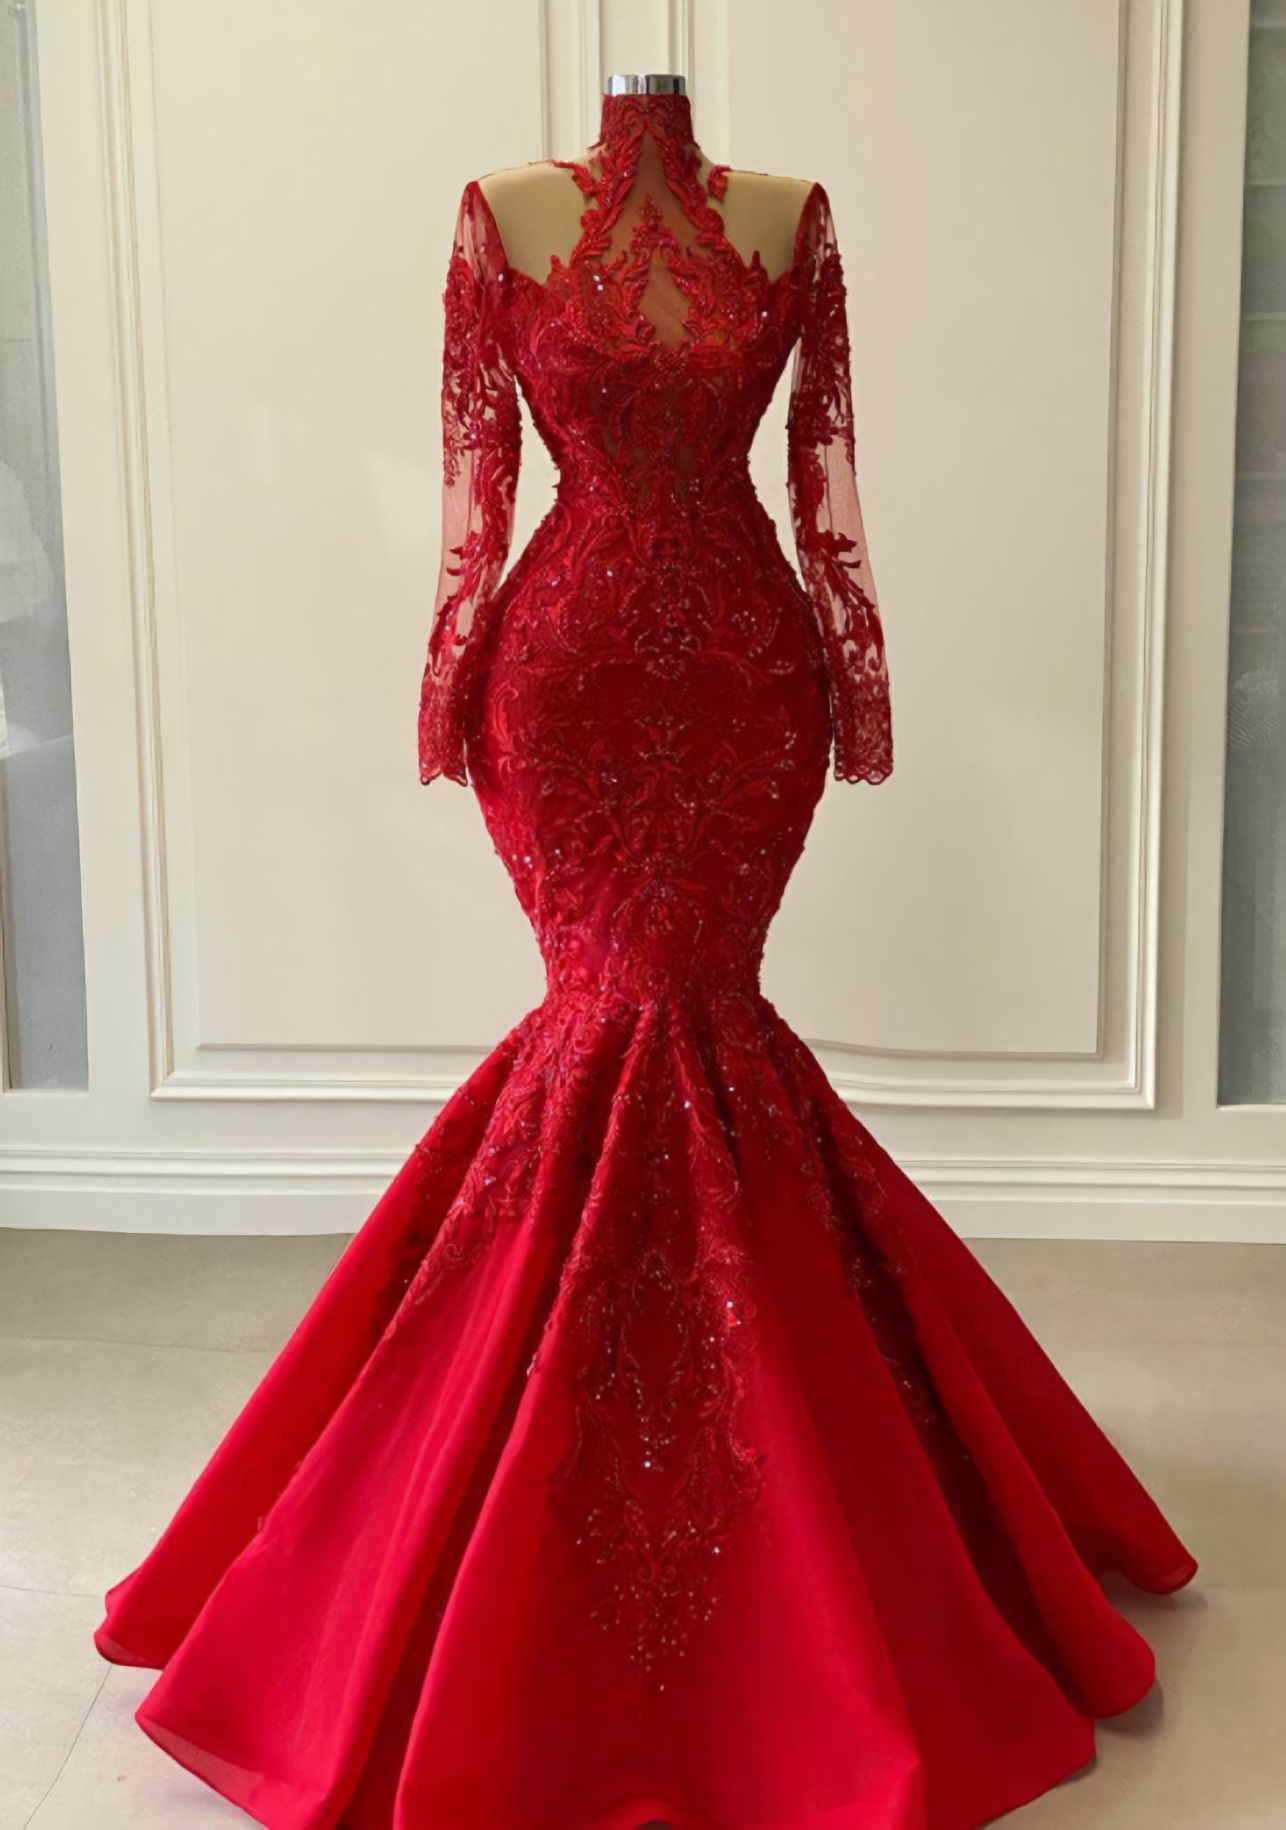 Mafia Dress, Arabic Aso Ebi Red Luxurious Lace Beaded Evening Dresses, Mermaid Long Sleeves Prom Dresses, Vintage Formal Party Second Reception Gowns